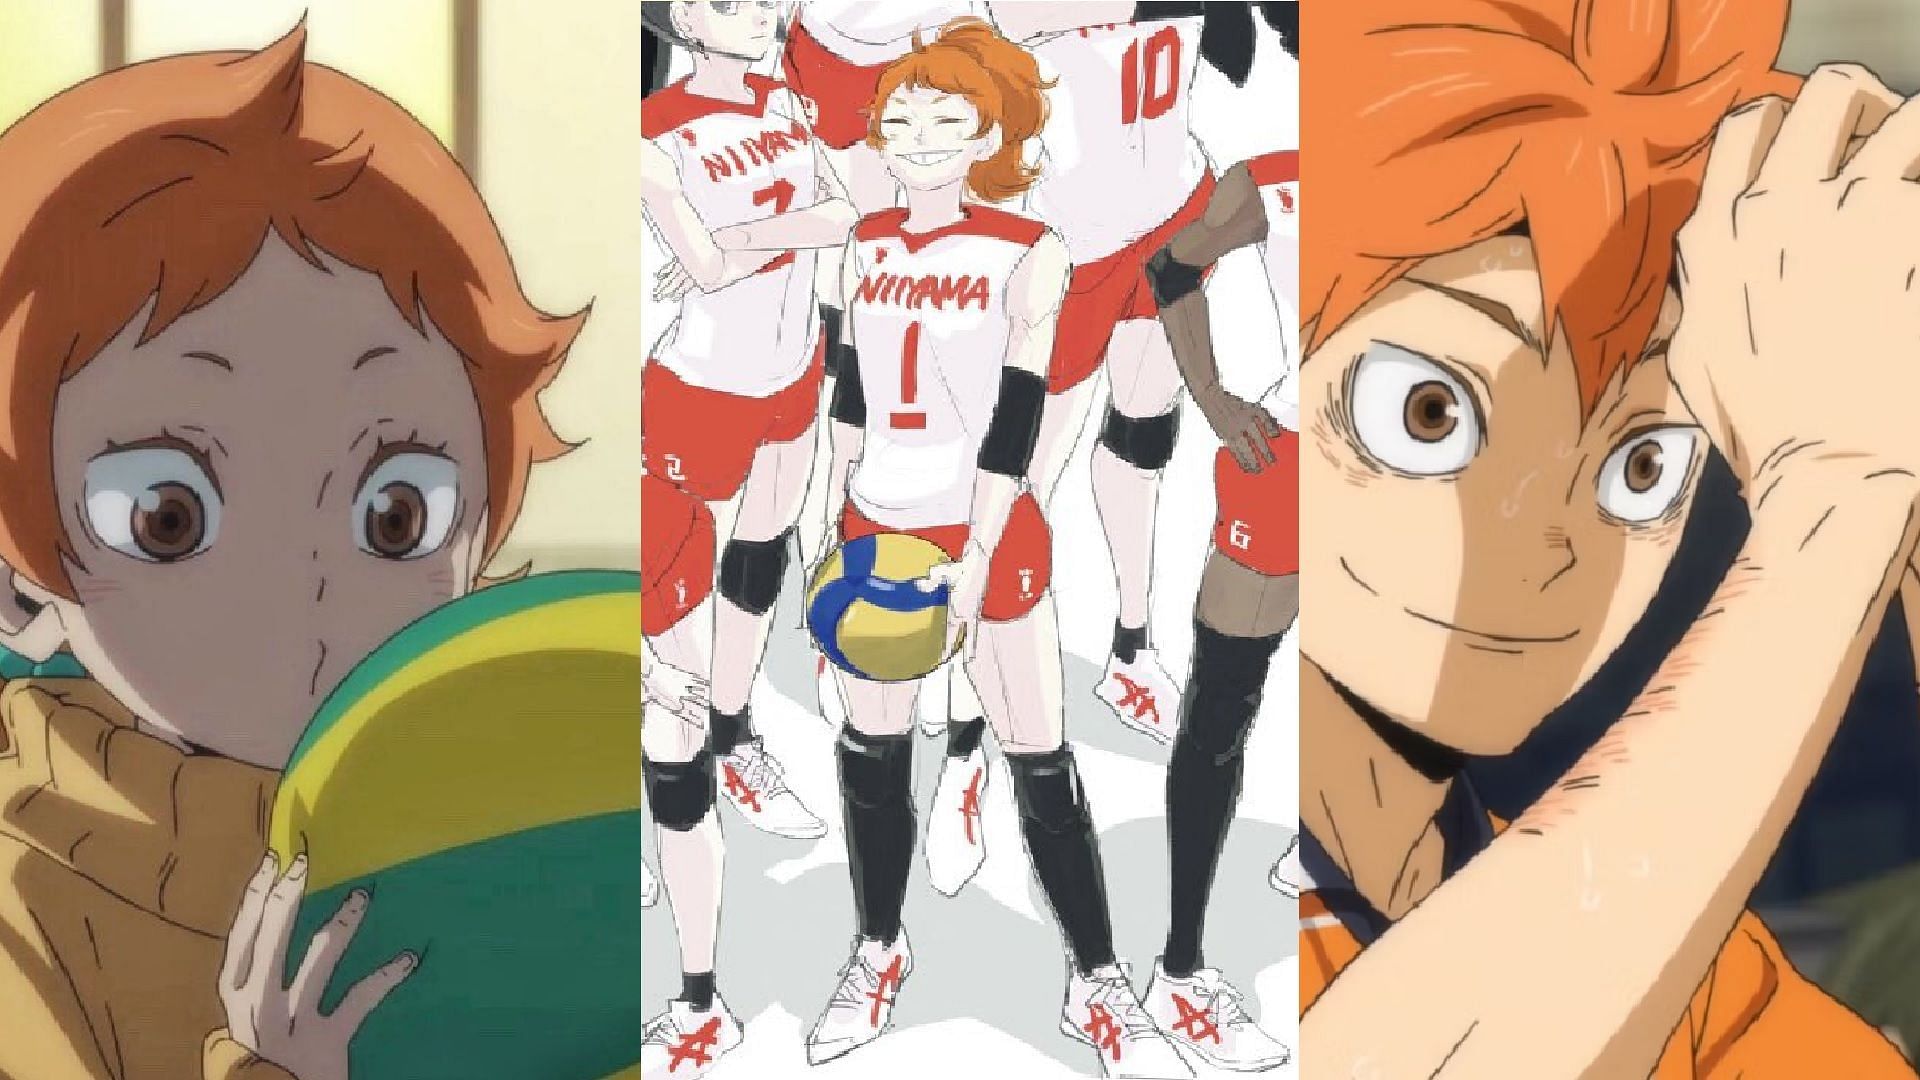 Haikyuu's New Anniversary Projects Will Include a New One-Shot